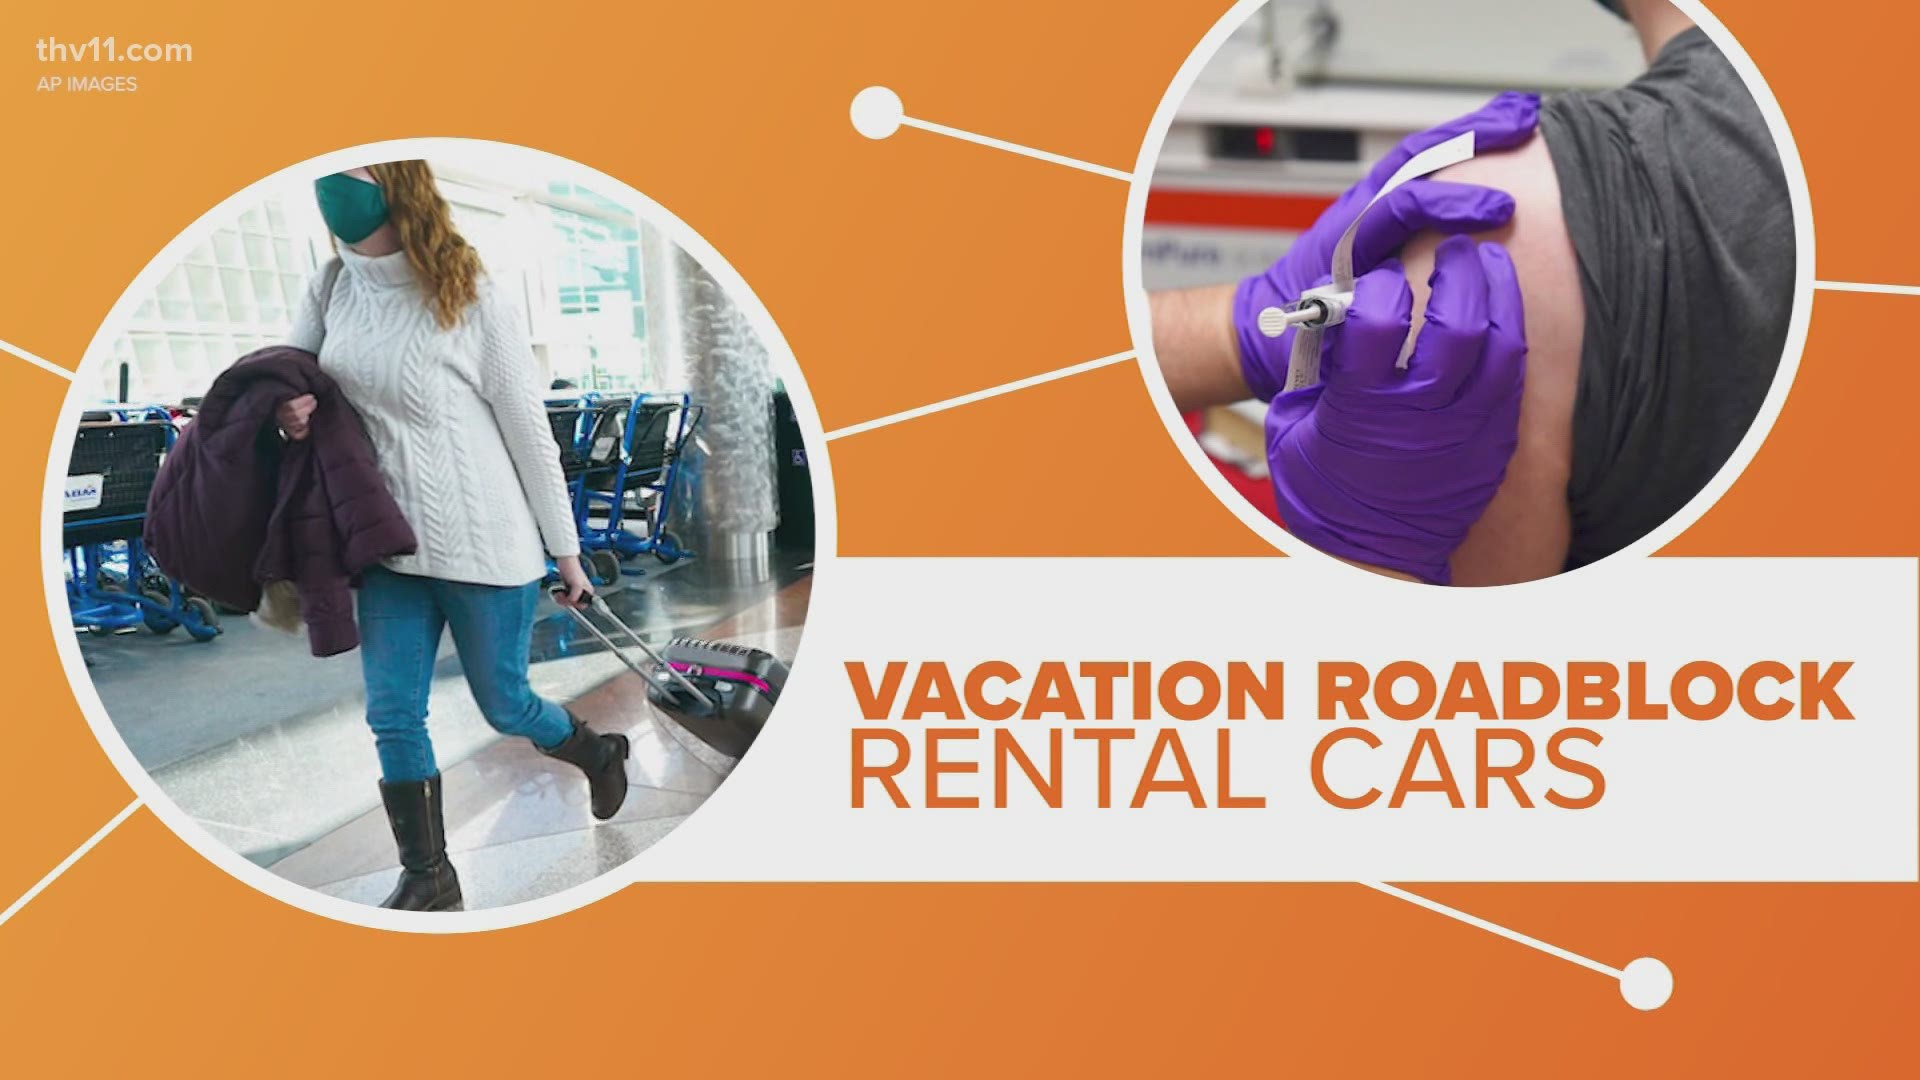 If you're fully vaccinated, you're probably excited about summer vacation. While you can score deals on flights and hotels, rental cars are another story.